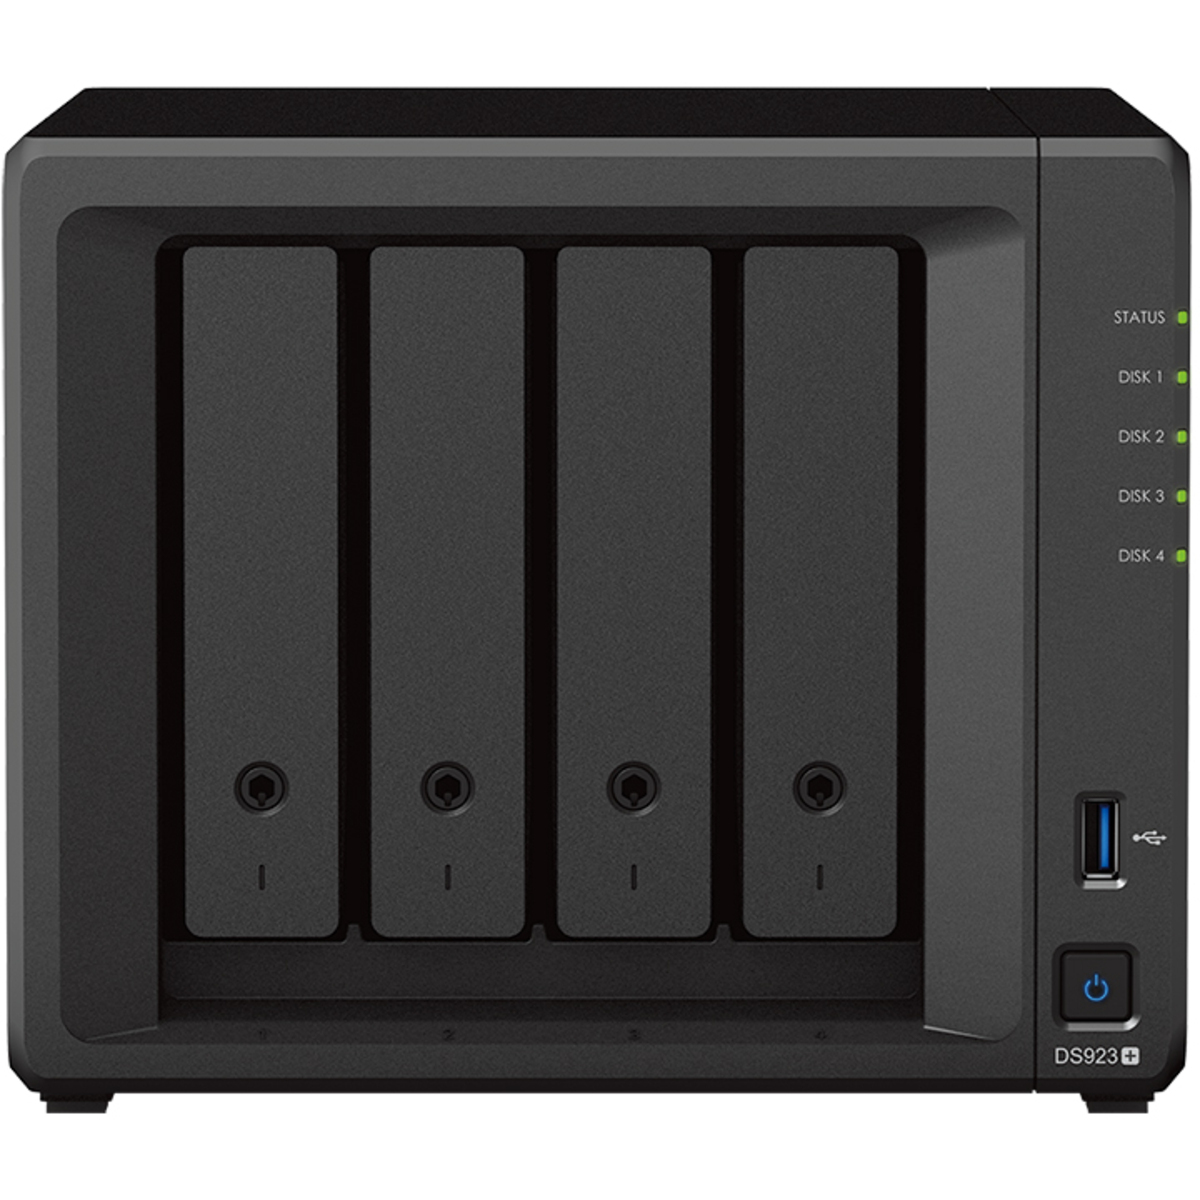 Synology DiskStation DS923+ 40tb 4-Bay Desktop Multimedia / Power User / Business NAS - Network Attached Storage Device 4x10tb Seagate EXOS X18 ST10000NM018G 3.5 7200rpm SATA 6Gb/s HDD ENTERPRISE Class Drives Installed - Burn-In Tested - ON SALE - FREE RAM UPGRADE DiskStation DS923+